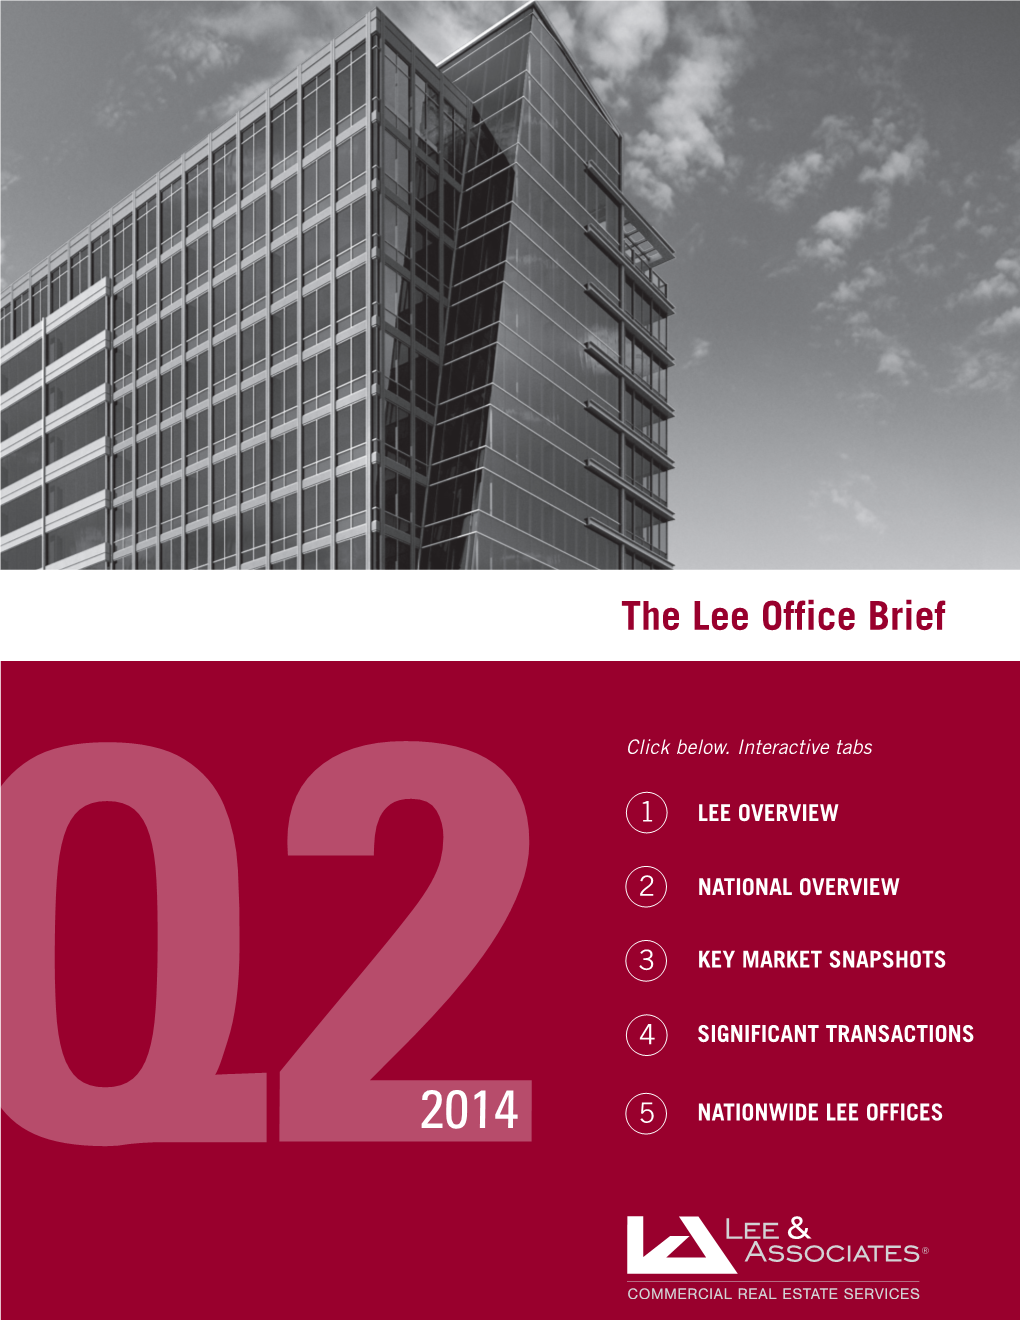 The Lee Office Brief